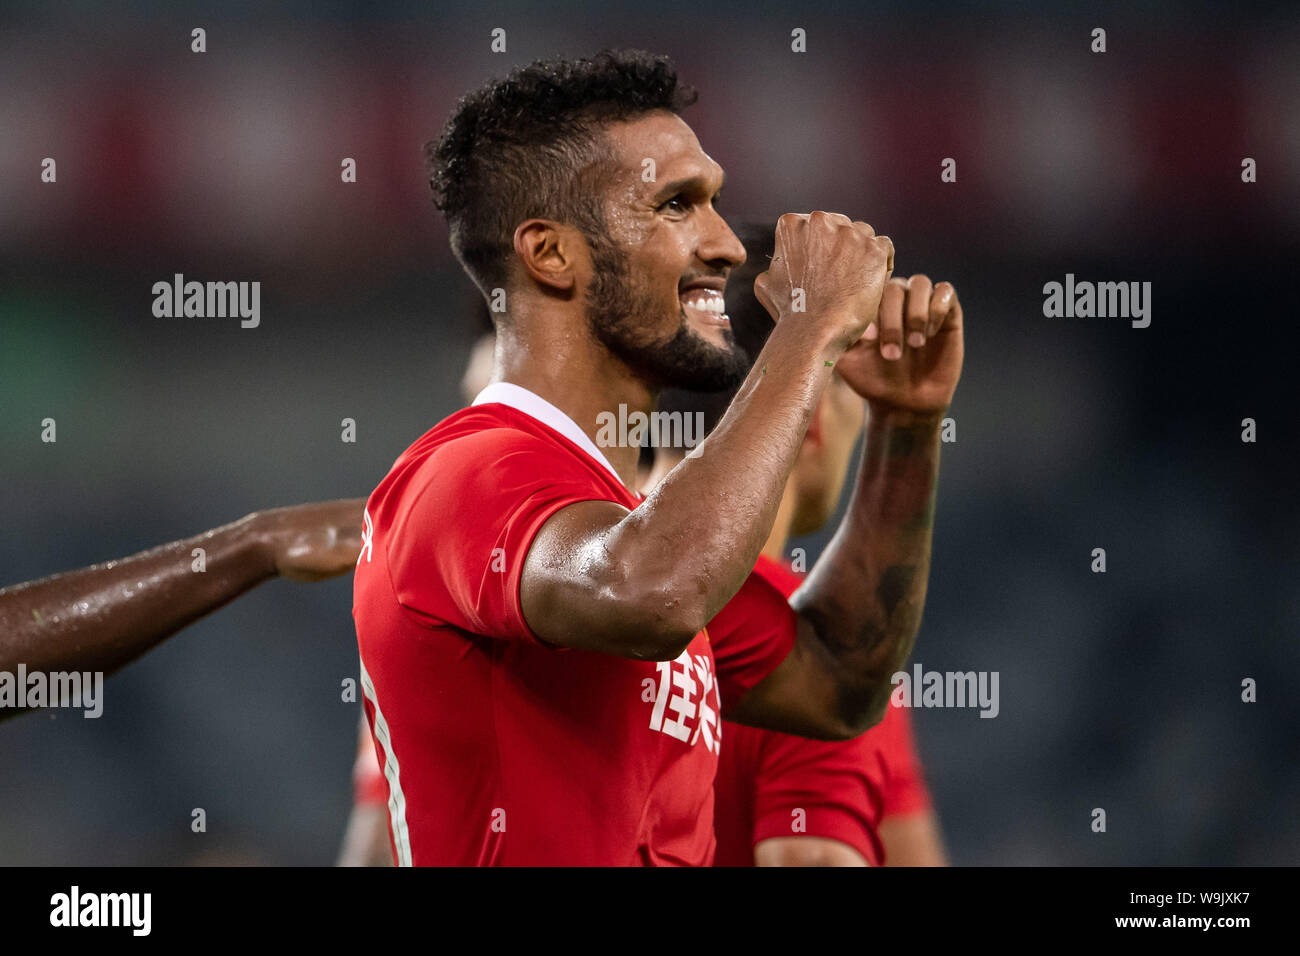 Brazilian-born Portuguese football player Dyego Sousa of Shenzhen F.C. celebrates after scoring against Guangzhou R&F F.C. in the 22nd round match during the 2019 Chinese Football Association Super League (CSL) in Shenzhen city, Guandong province, China, 14 August 2019. Stock Photo